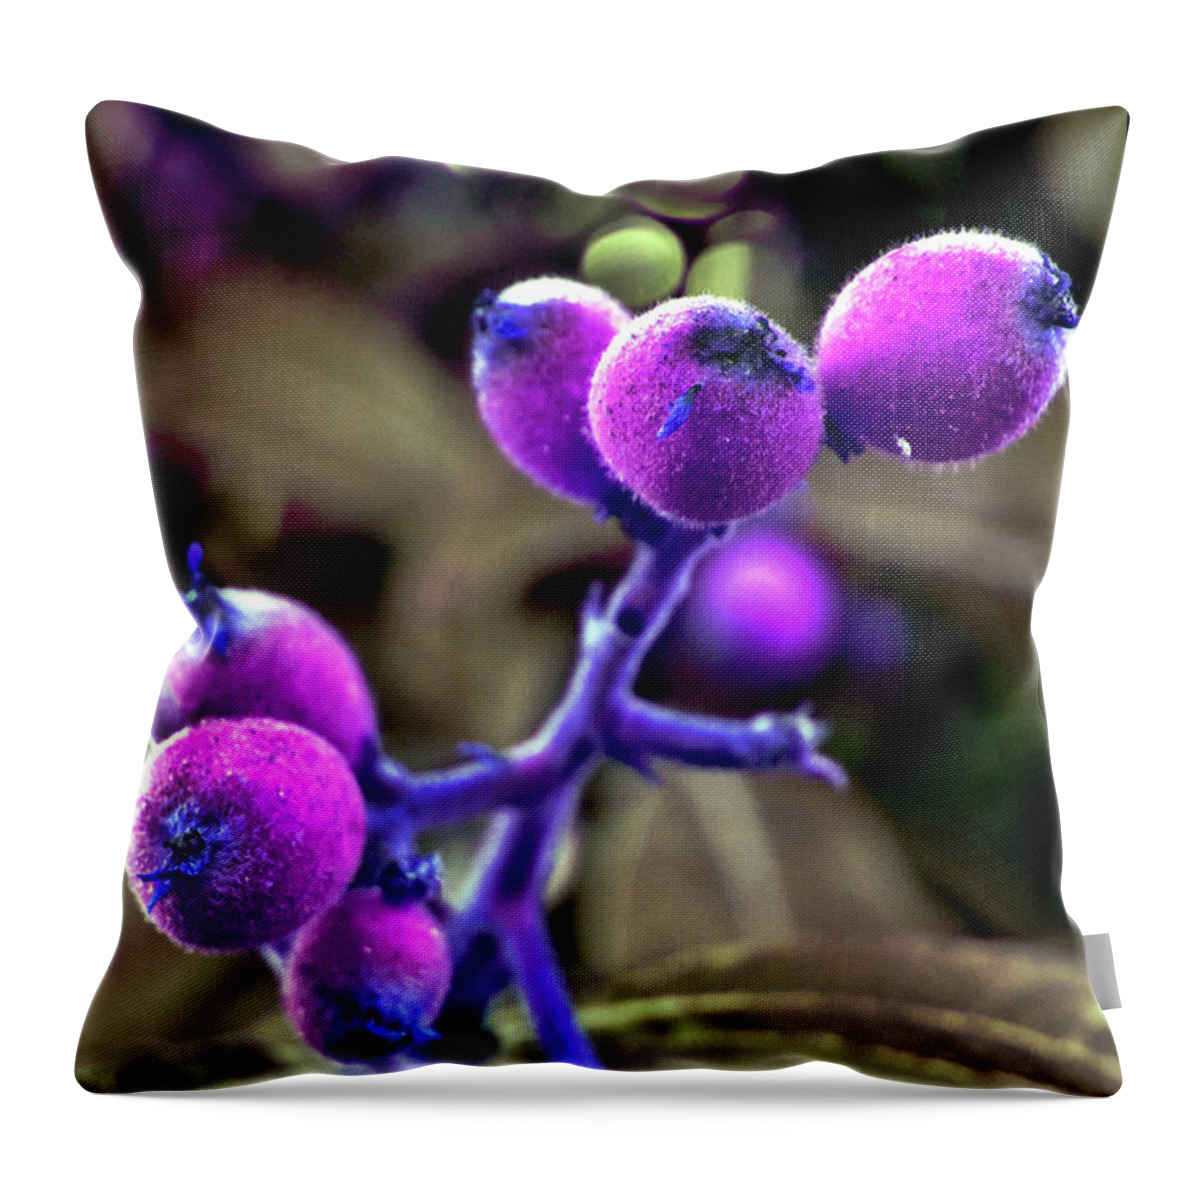 Exotic Fruits Throw Pillow featuring the photograph Exotic Purple Fruits by Silva Wischeropp